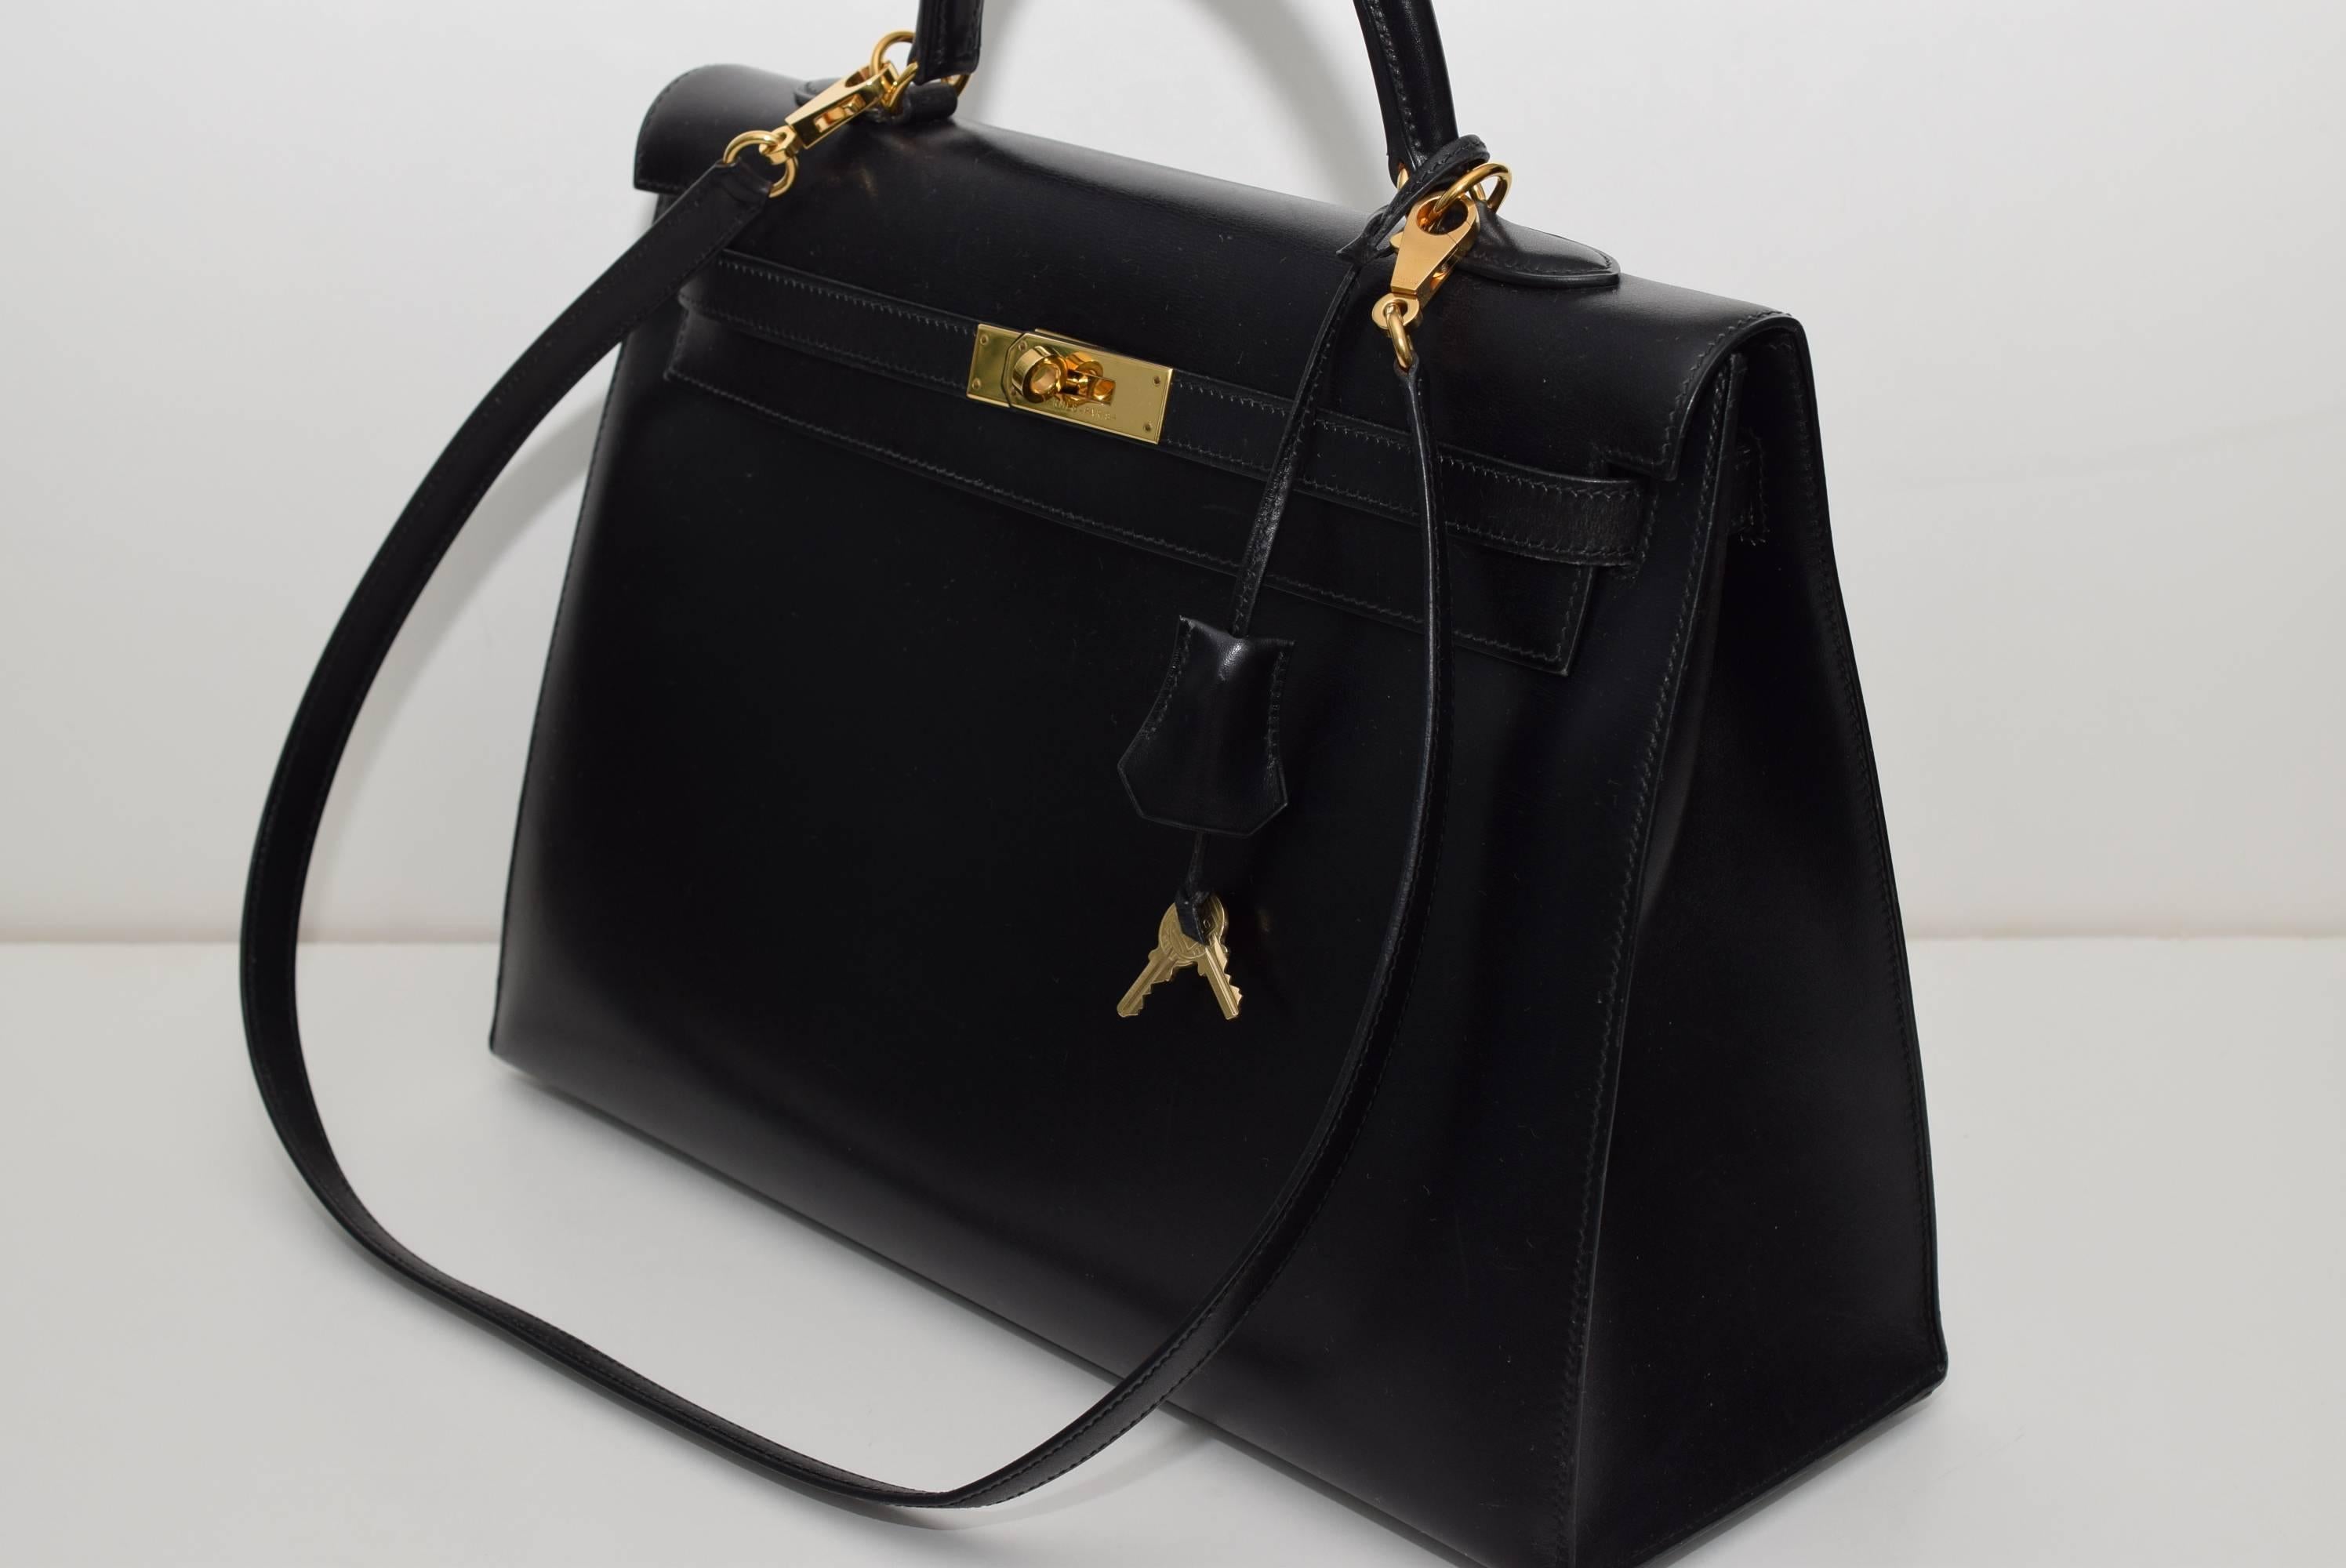 Herrmes Black Kelly 35cm in box leather with gold hardware.
This Kelly features tonal stitching, front toggle closure, lock and two keys, Hermes Box, Hermes dust bag, and a single rolled handle. The interior is lined in Black chevre and features